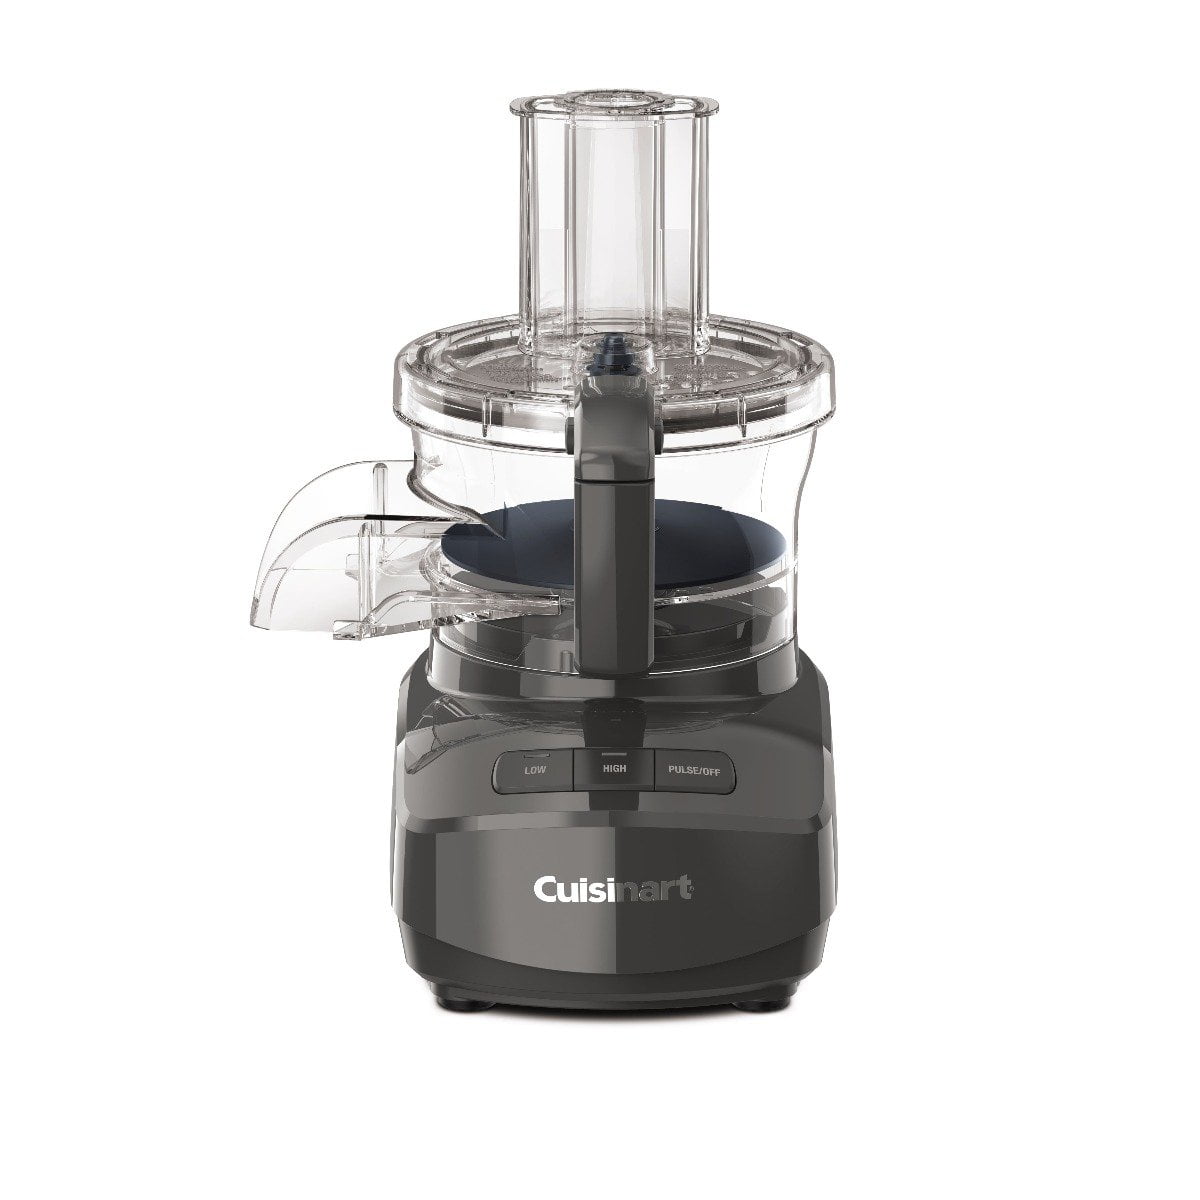  Breville Sous Chef Pro 16 Cup Food Processor, Brushed Stainless  Steel, BFP800XL: Full Size Food Processors: Home & Kitchen